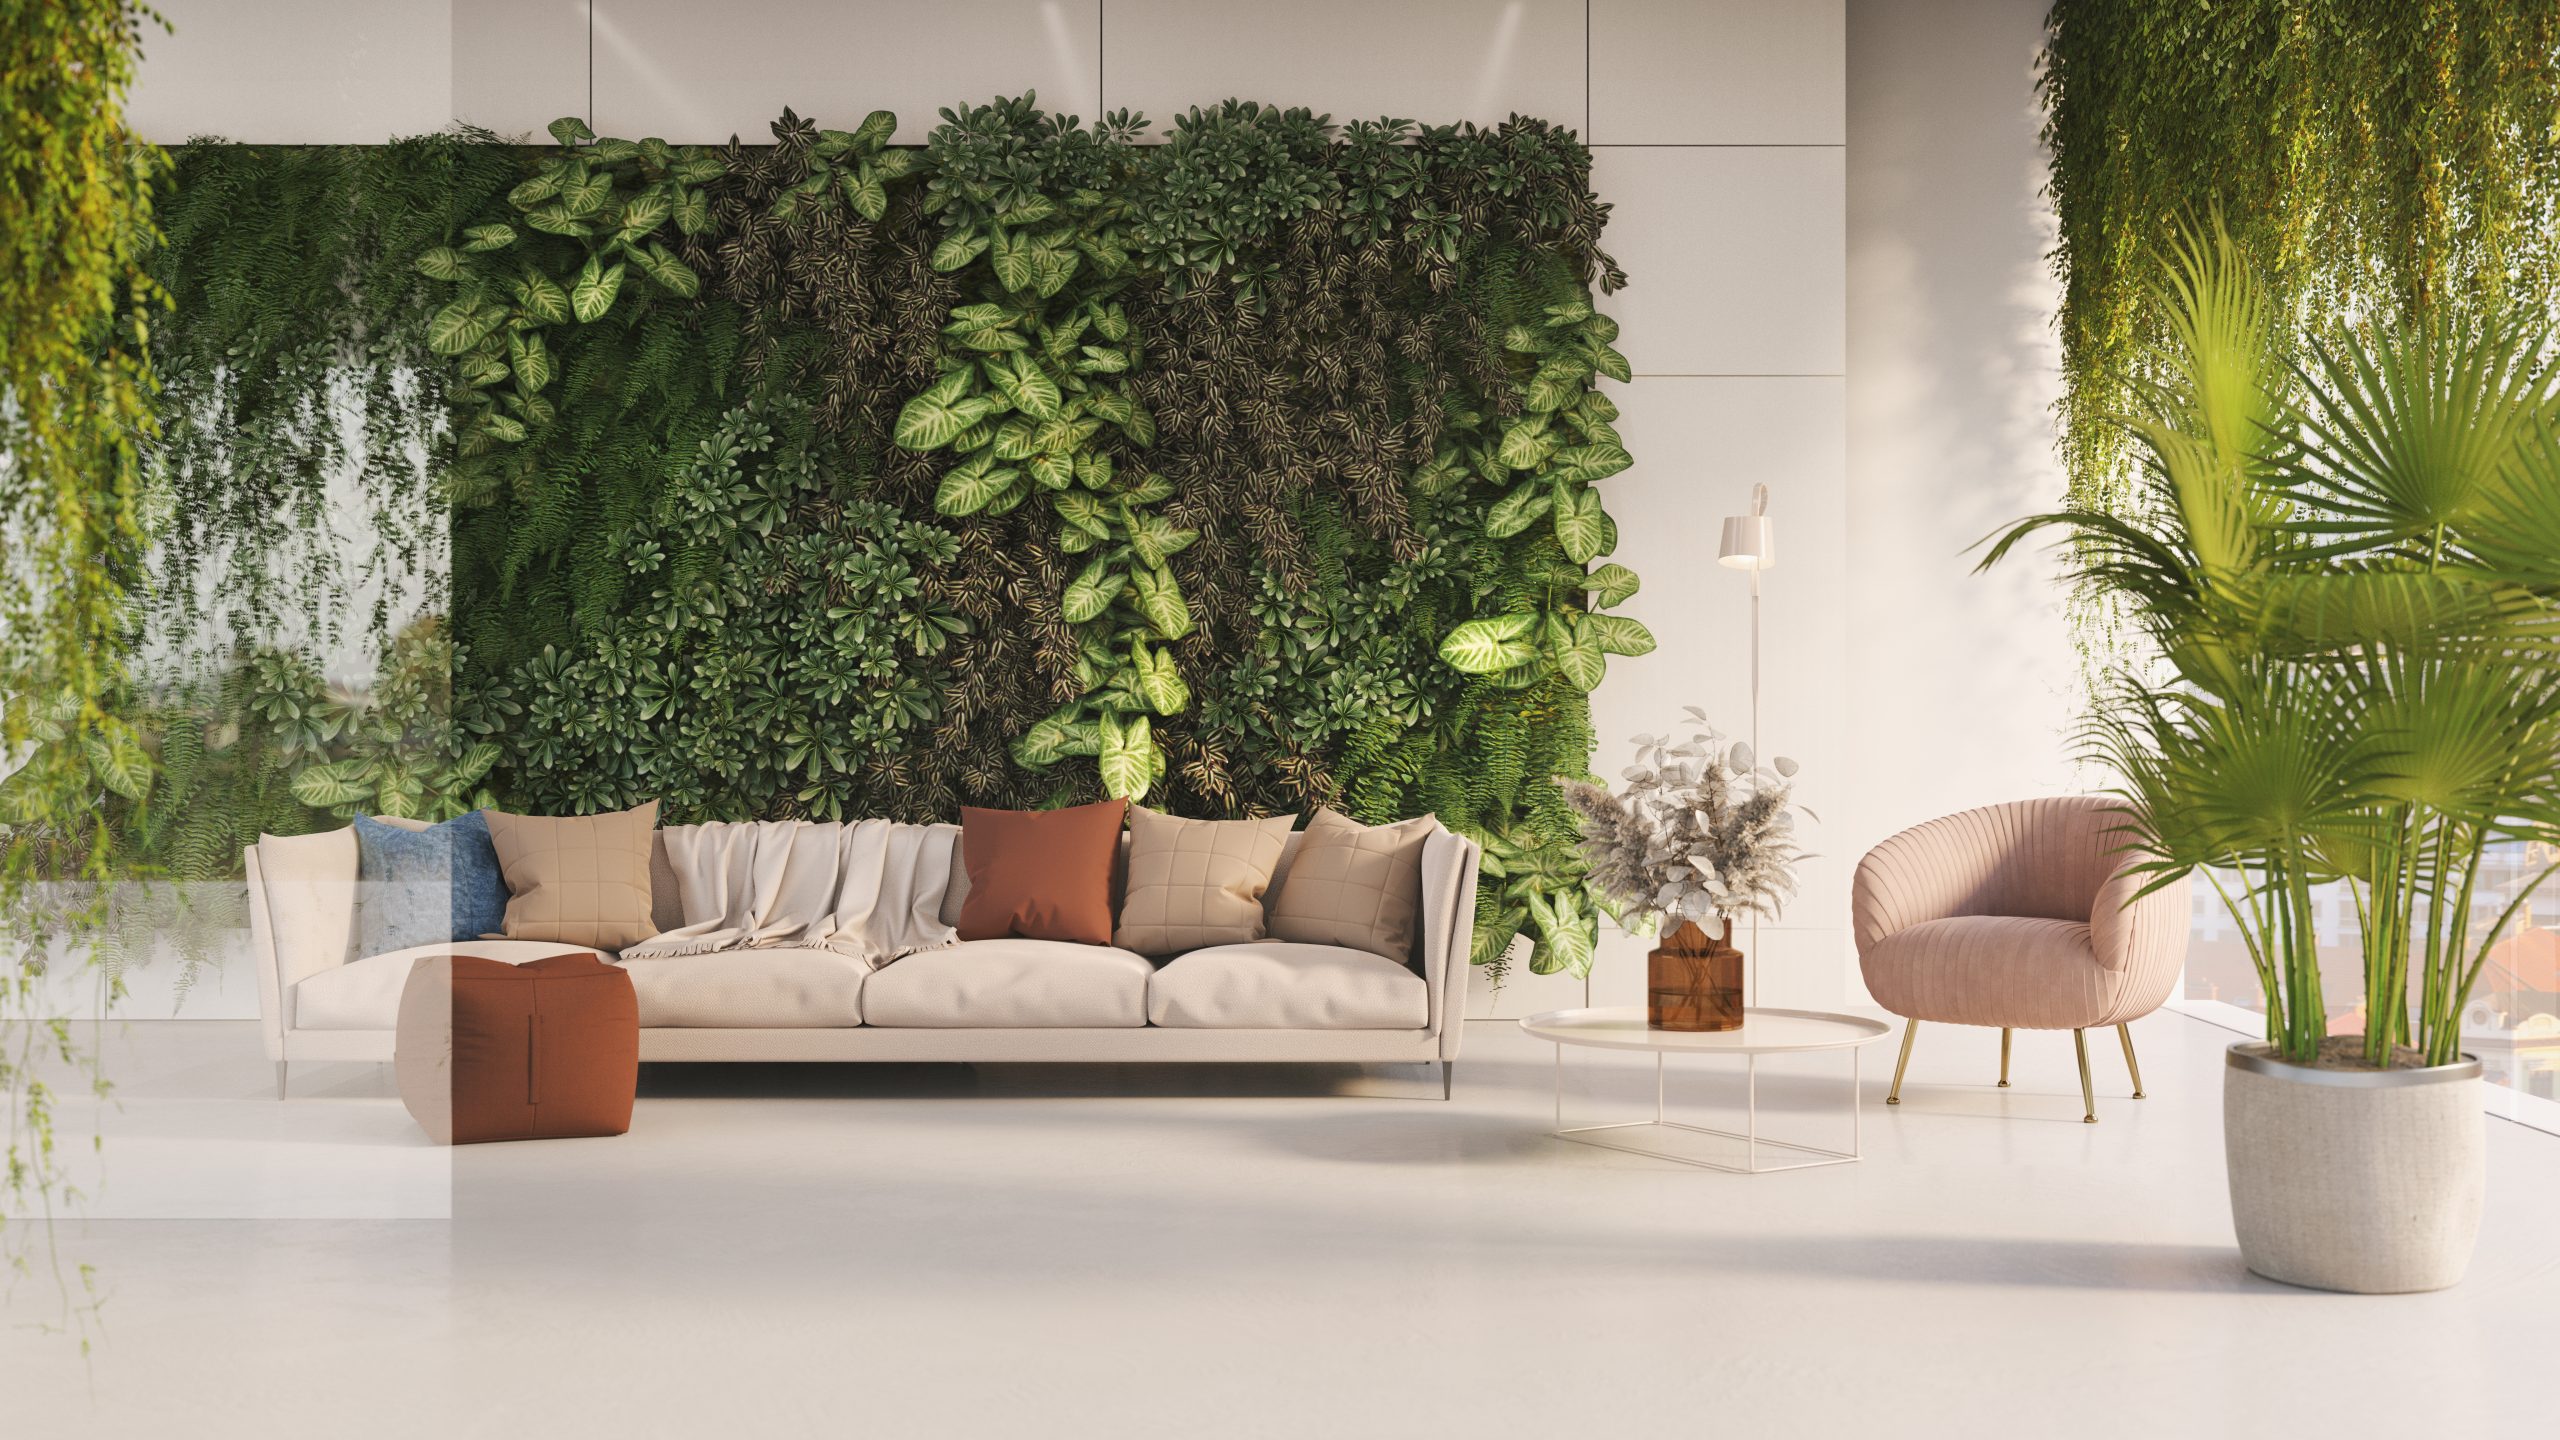 A large green living wall behind a sofa brings colour to a spacious living room.